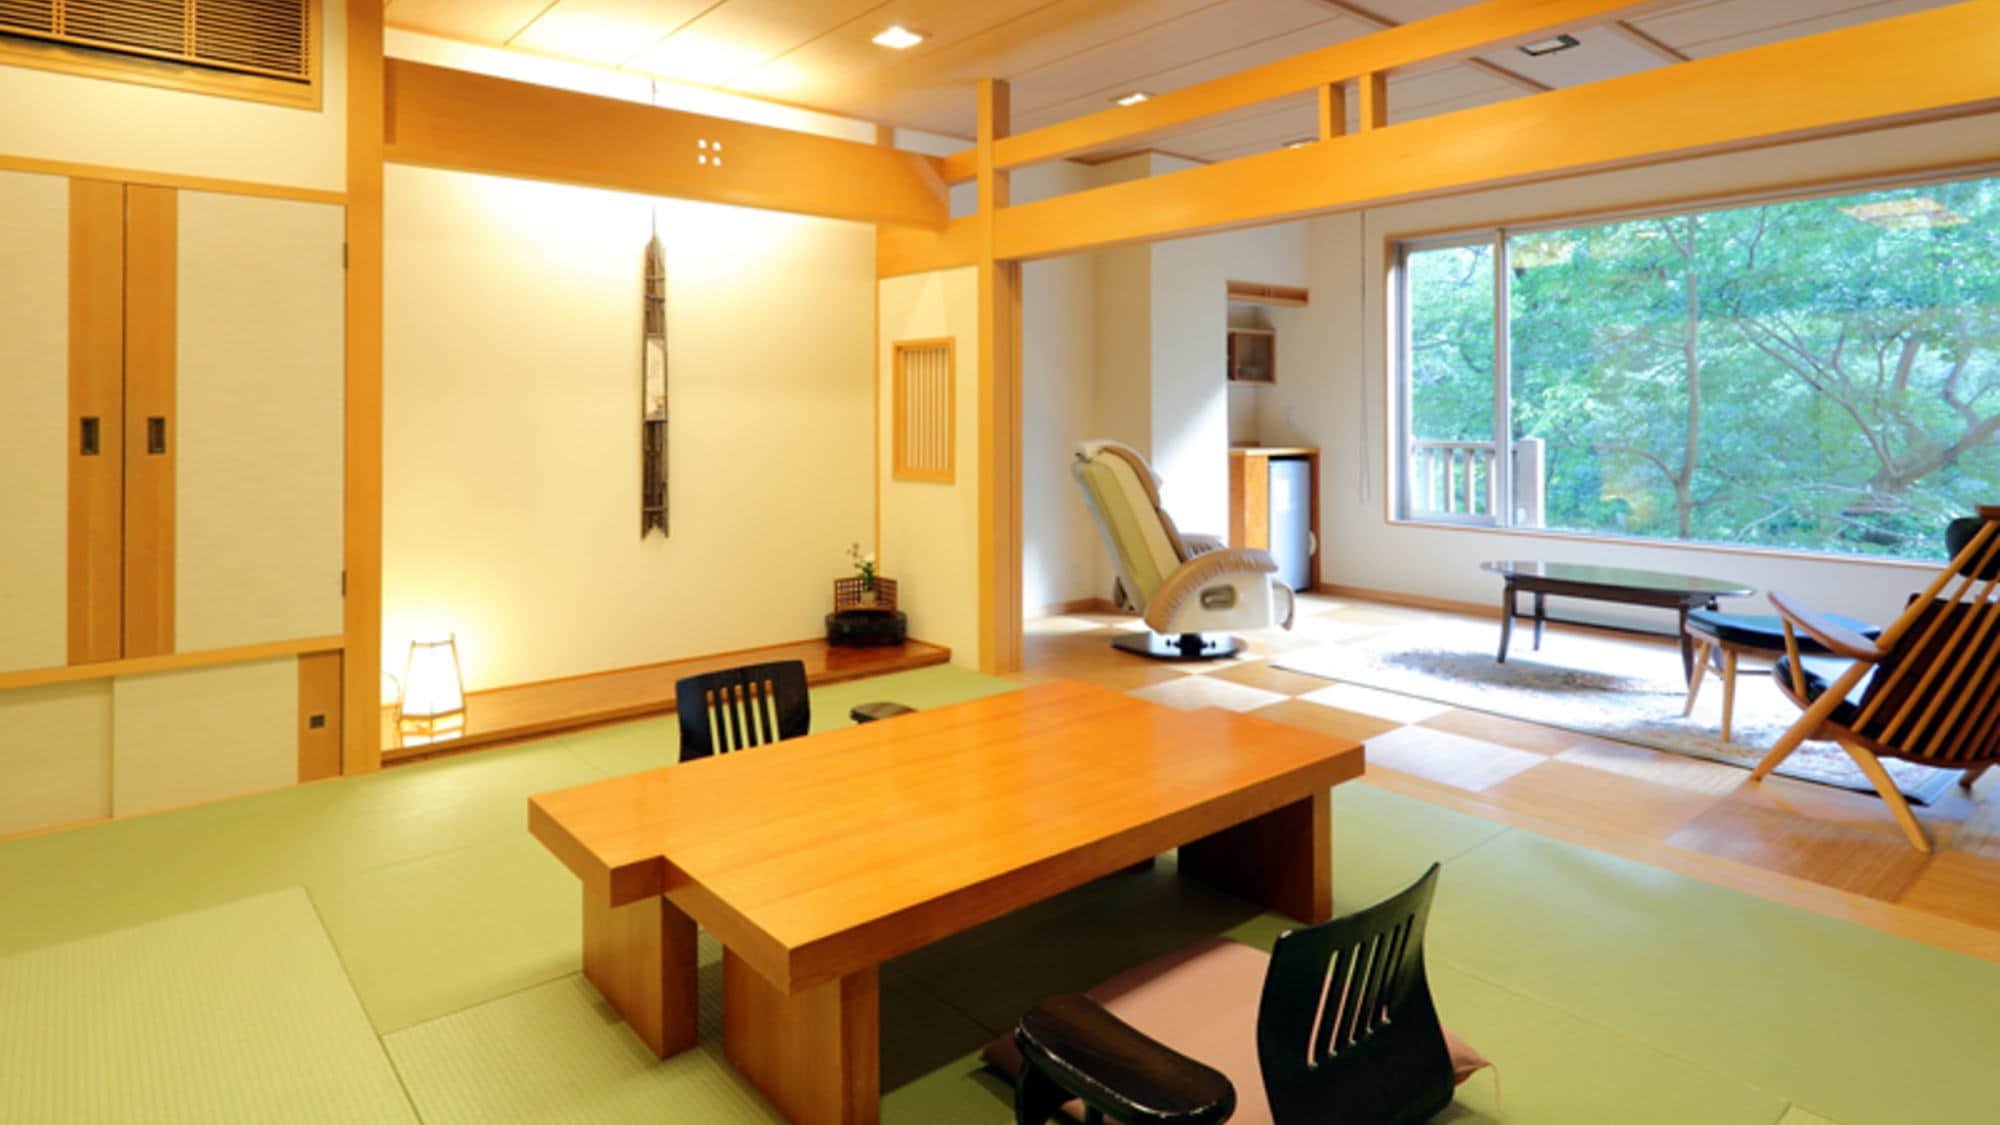 [Room with flooring living room] Japanese 10 tatami mats + bamboo flooring 8 tatami mats living room + massage chair + DVD